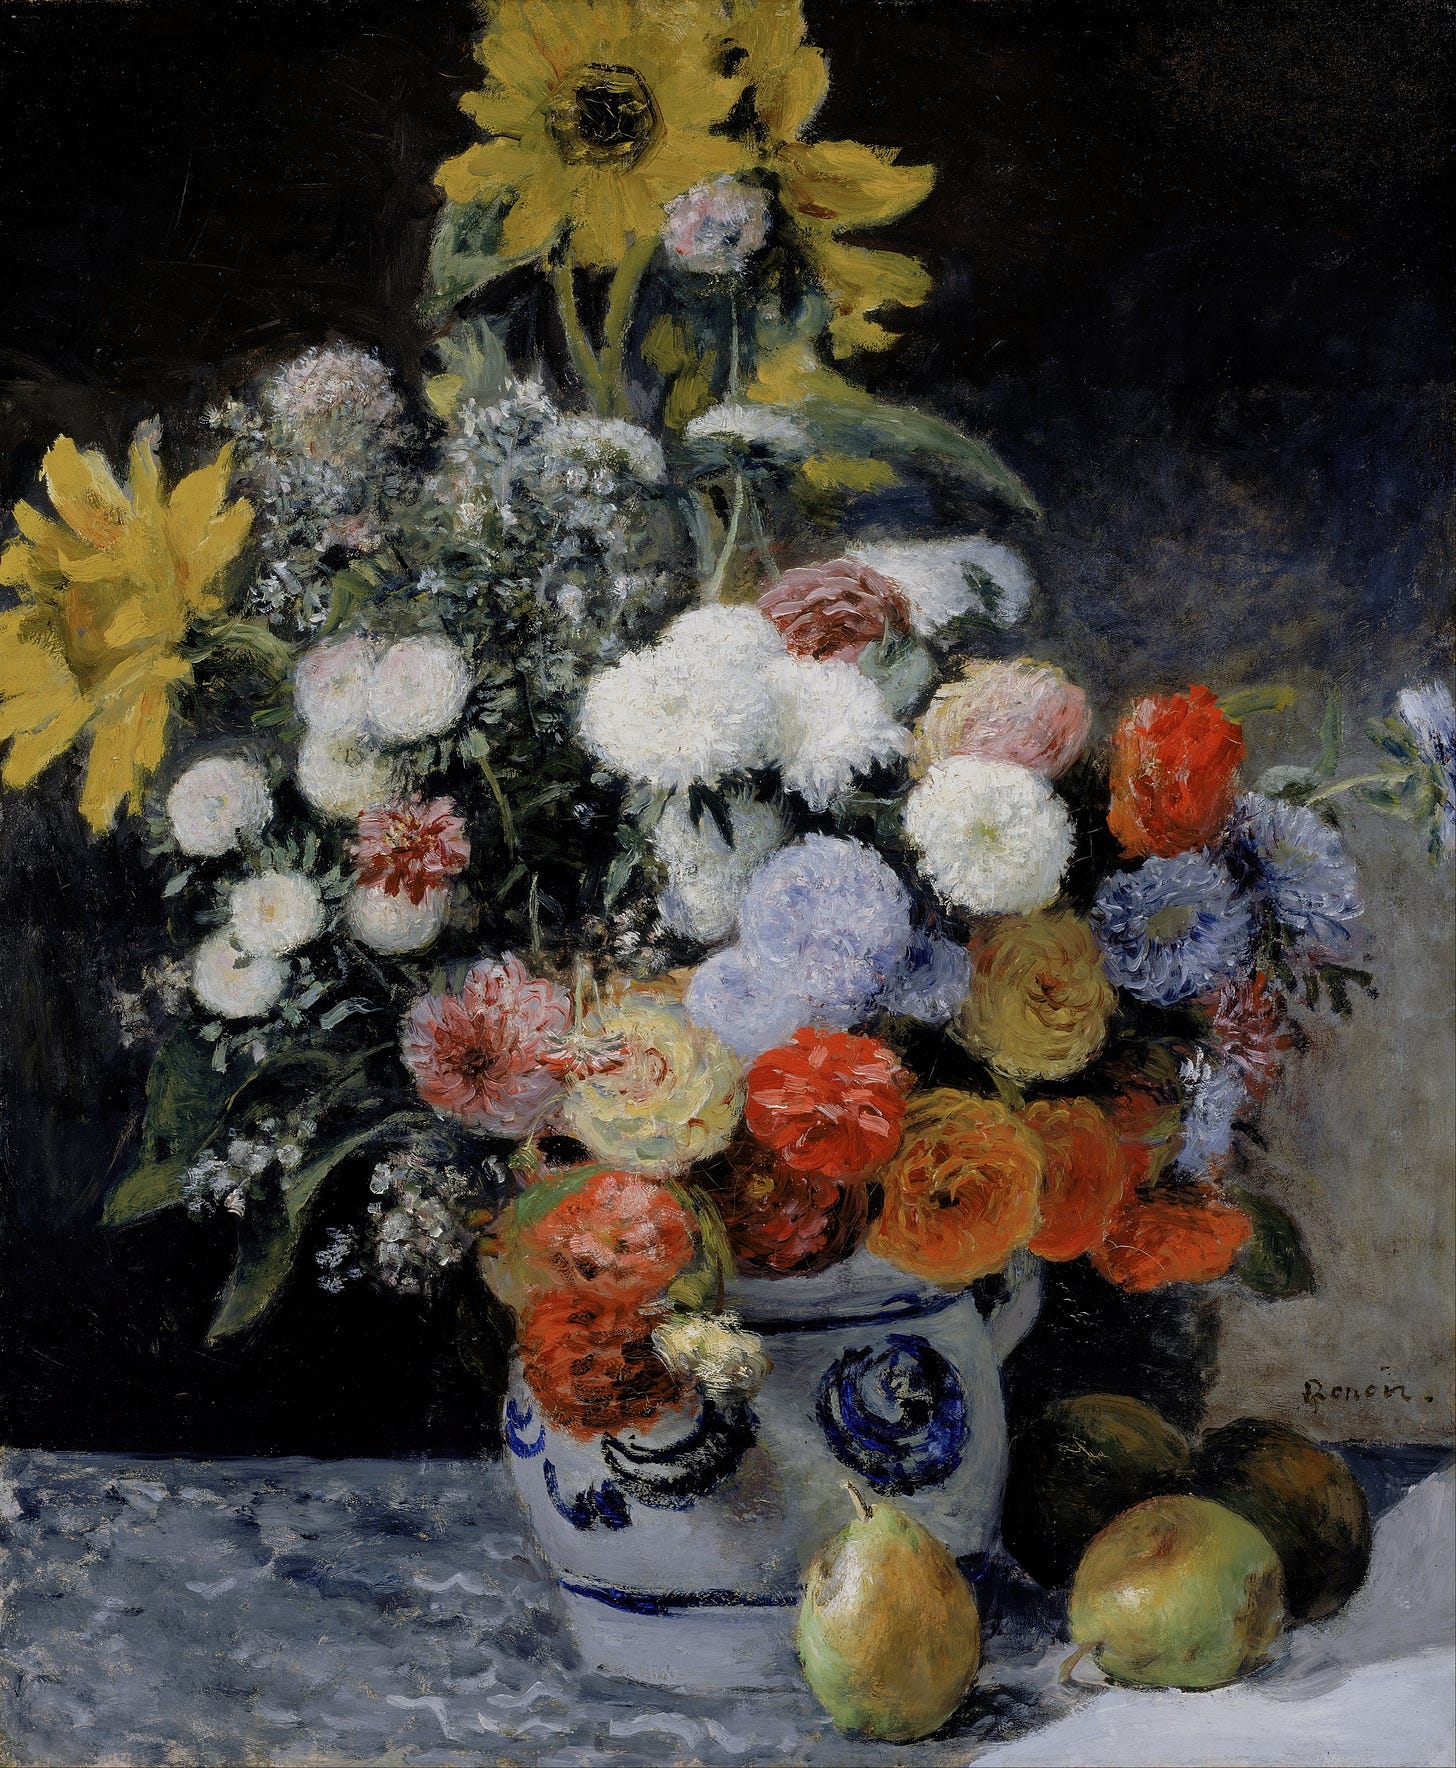 Mixed Flowers in an Earthenware Pot (about 1869) by Pierre-Auguste Renoir